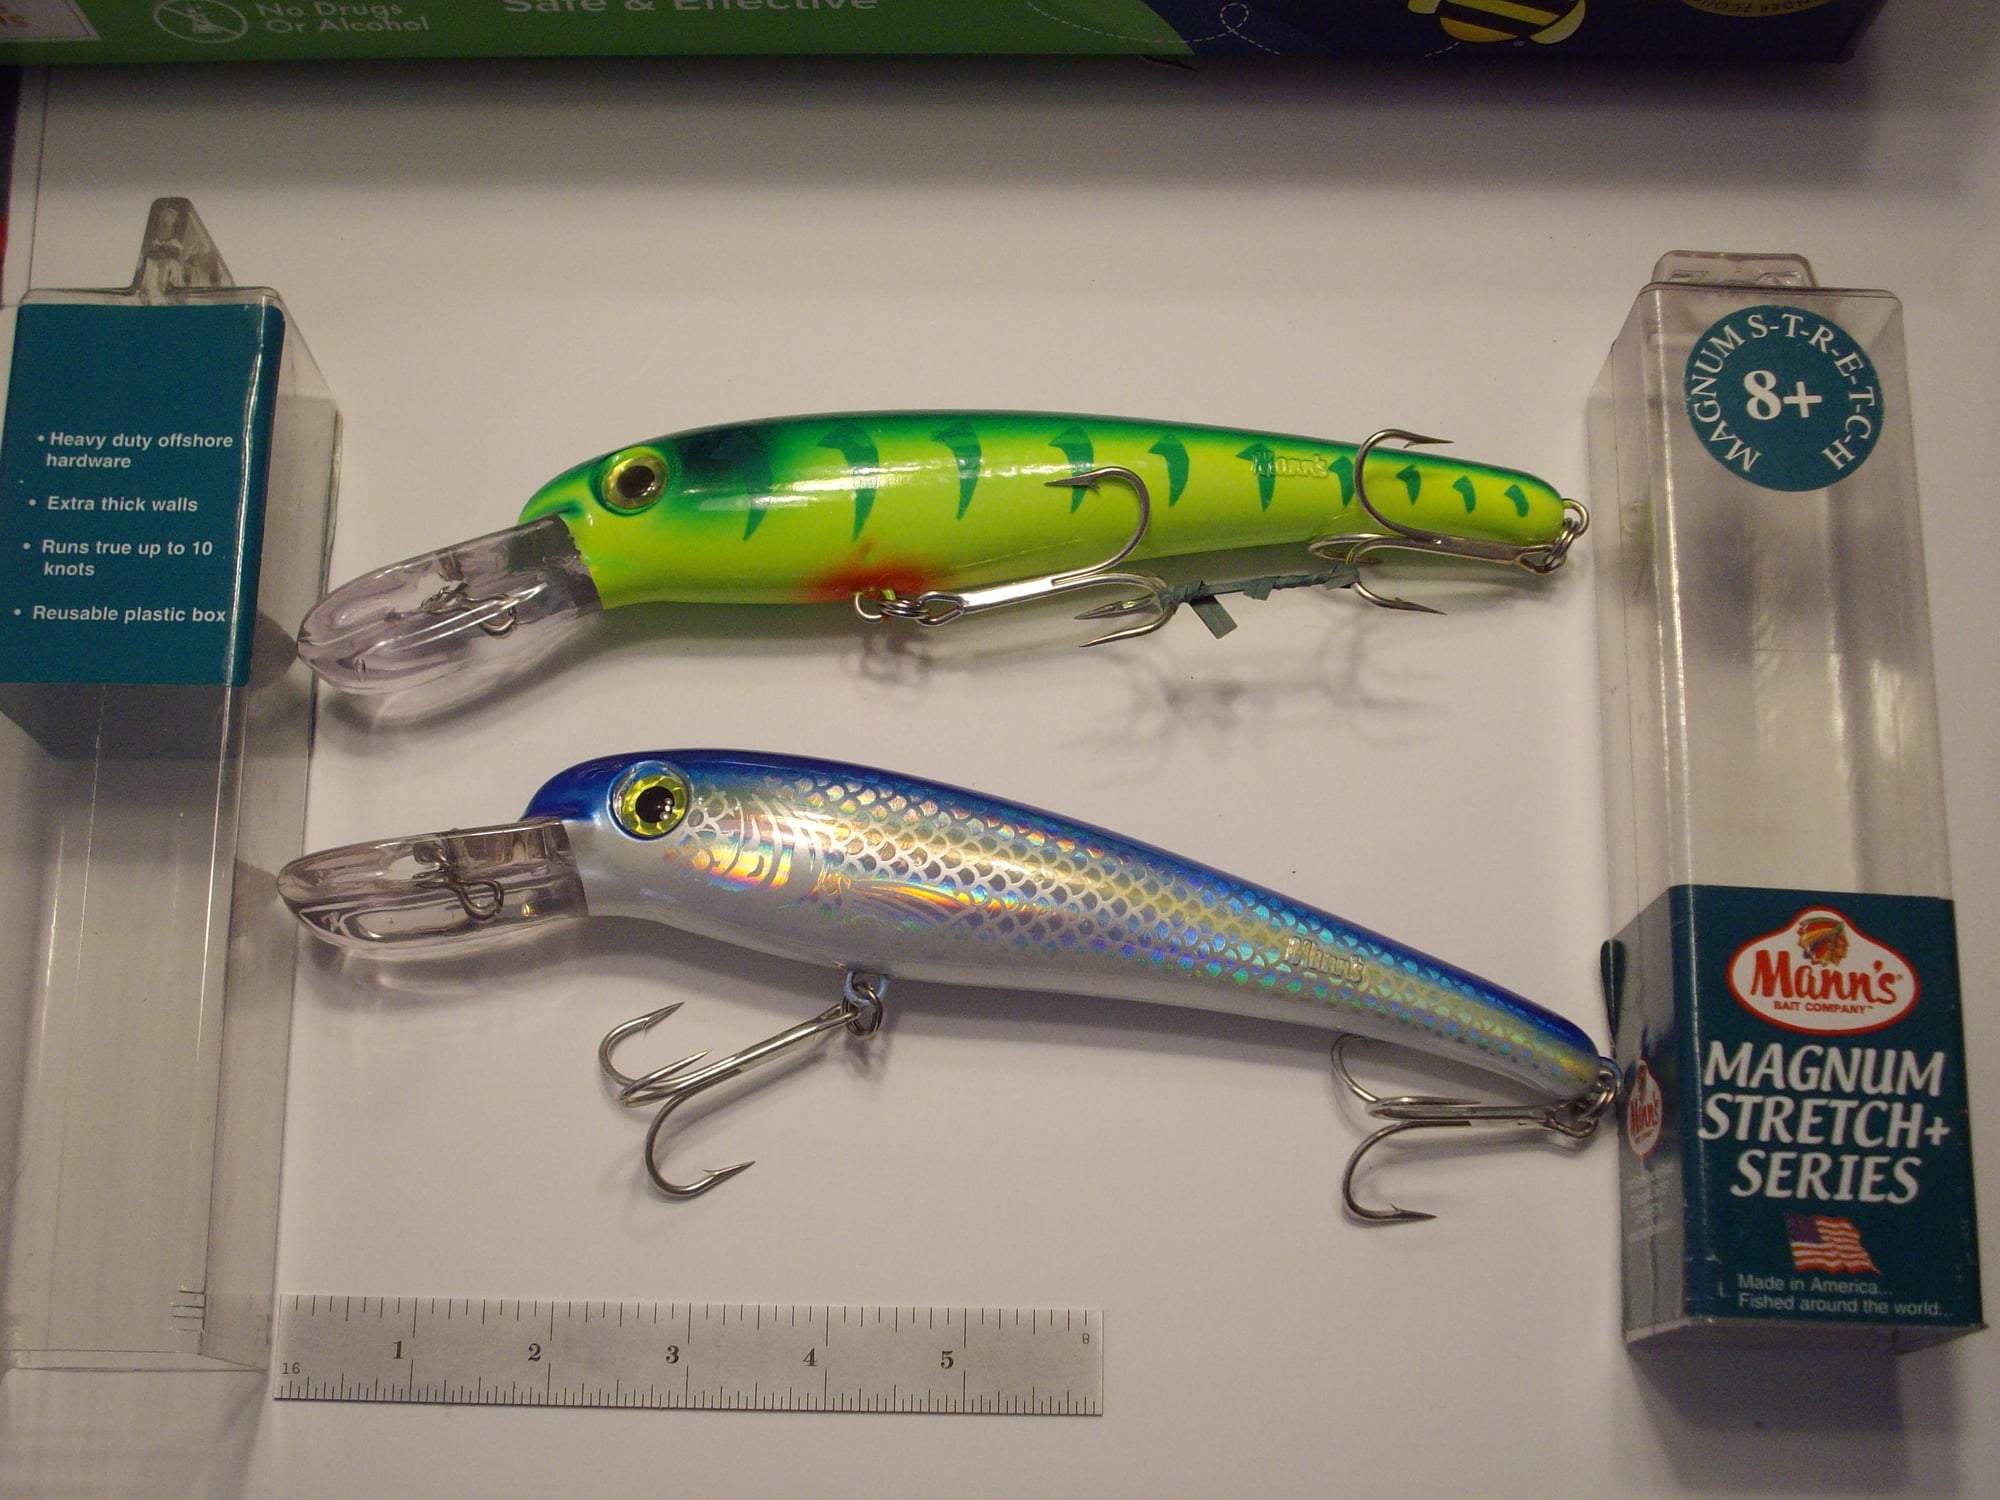 Manns stretch 8's, new, $10.00 - The Hull Truth - Boating and Fishing Forum